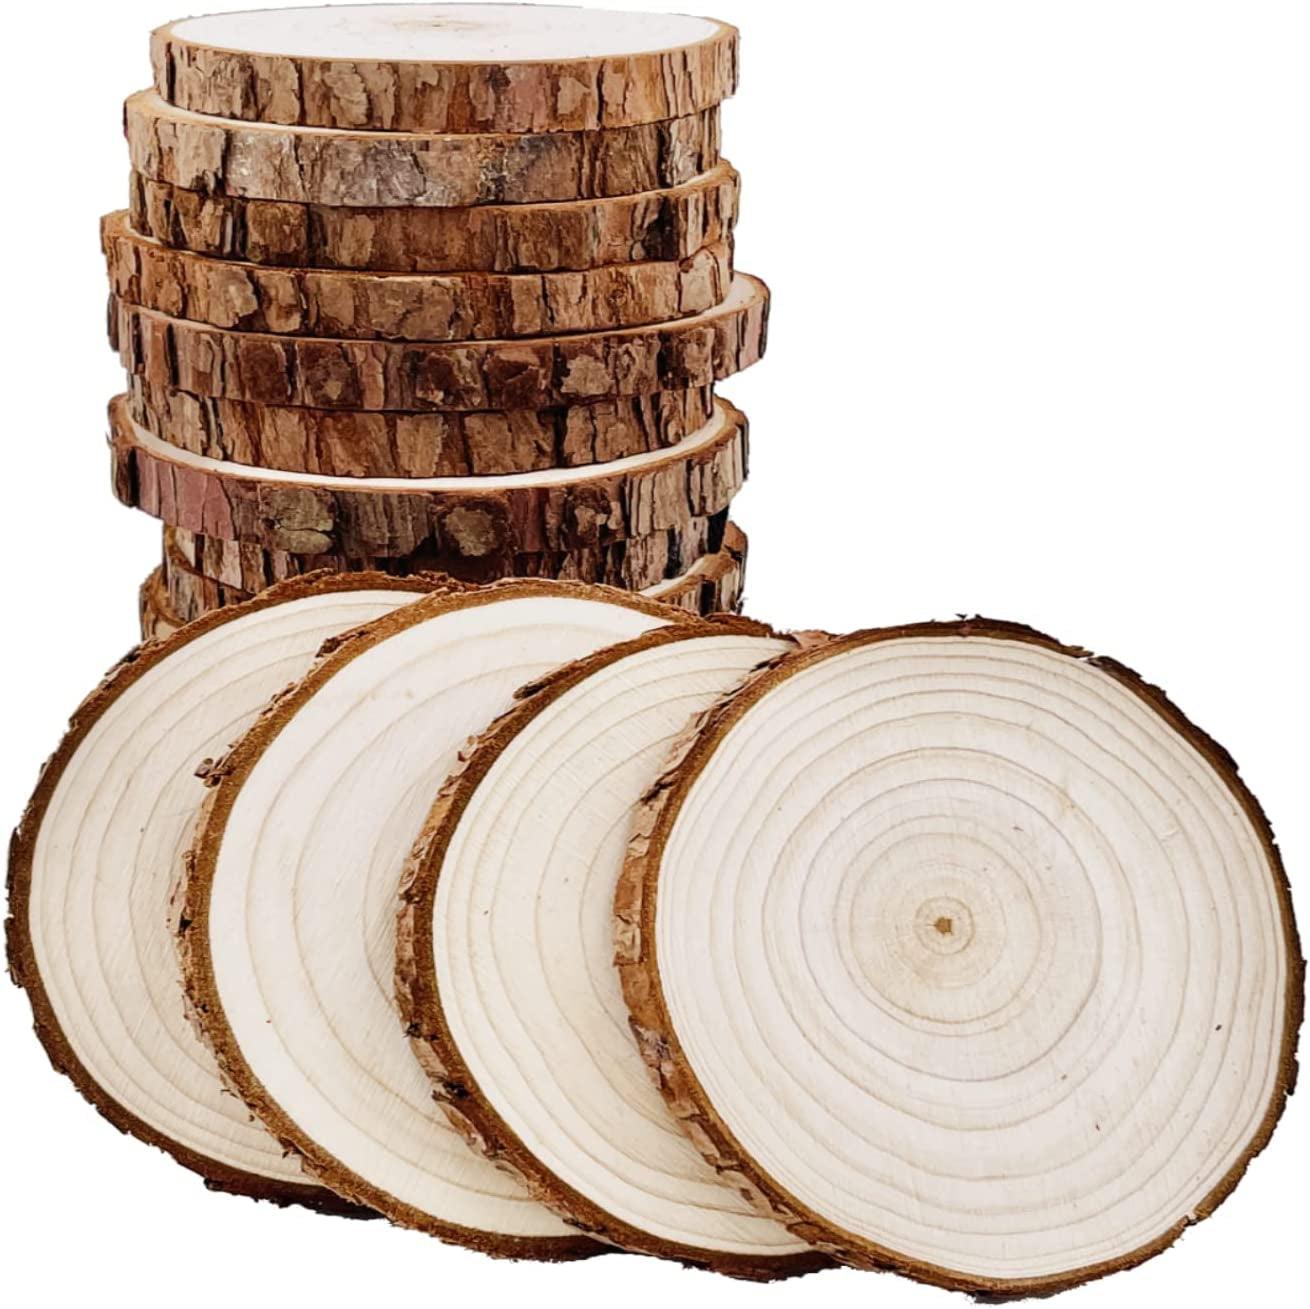 Unfinished Natural Wood Slices 20 Pcs 3.5-4 Inch Craft Wood Kit Circles Crafts Rustic DIY with Bark - WoodArtSupply